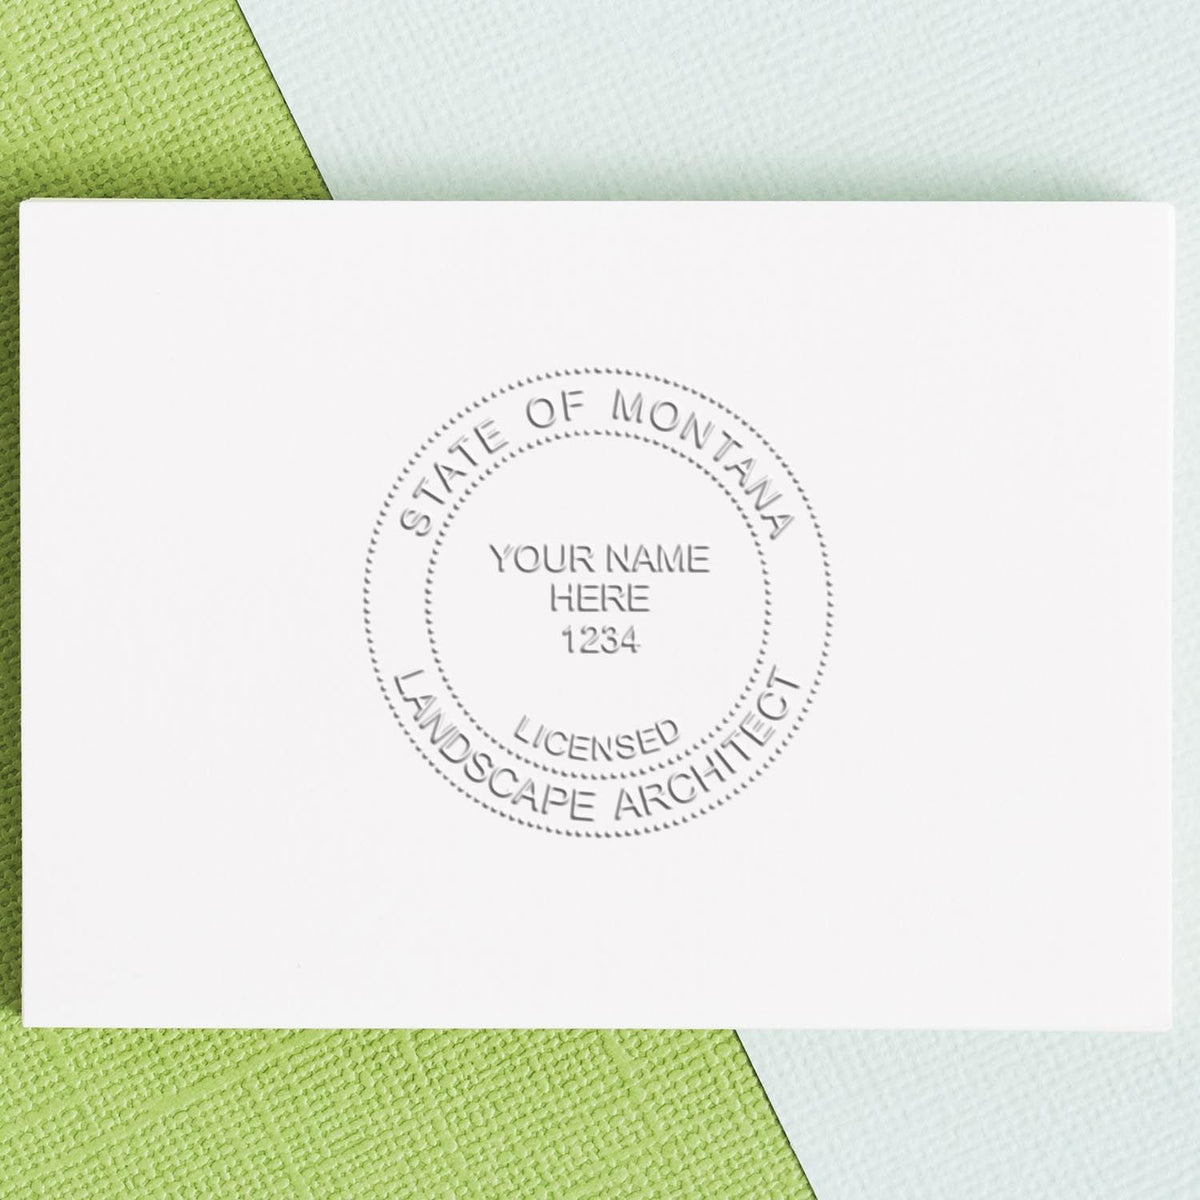 An alternative view of the Hybrid Montana Landscape Architect Seal stamped on a sheet of paper showing the image in use